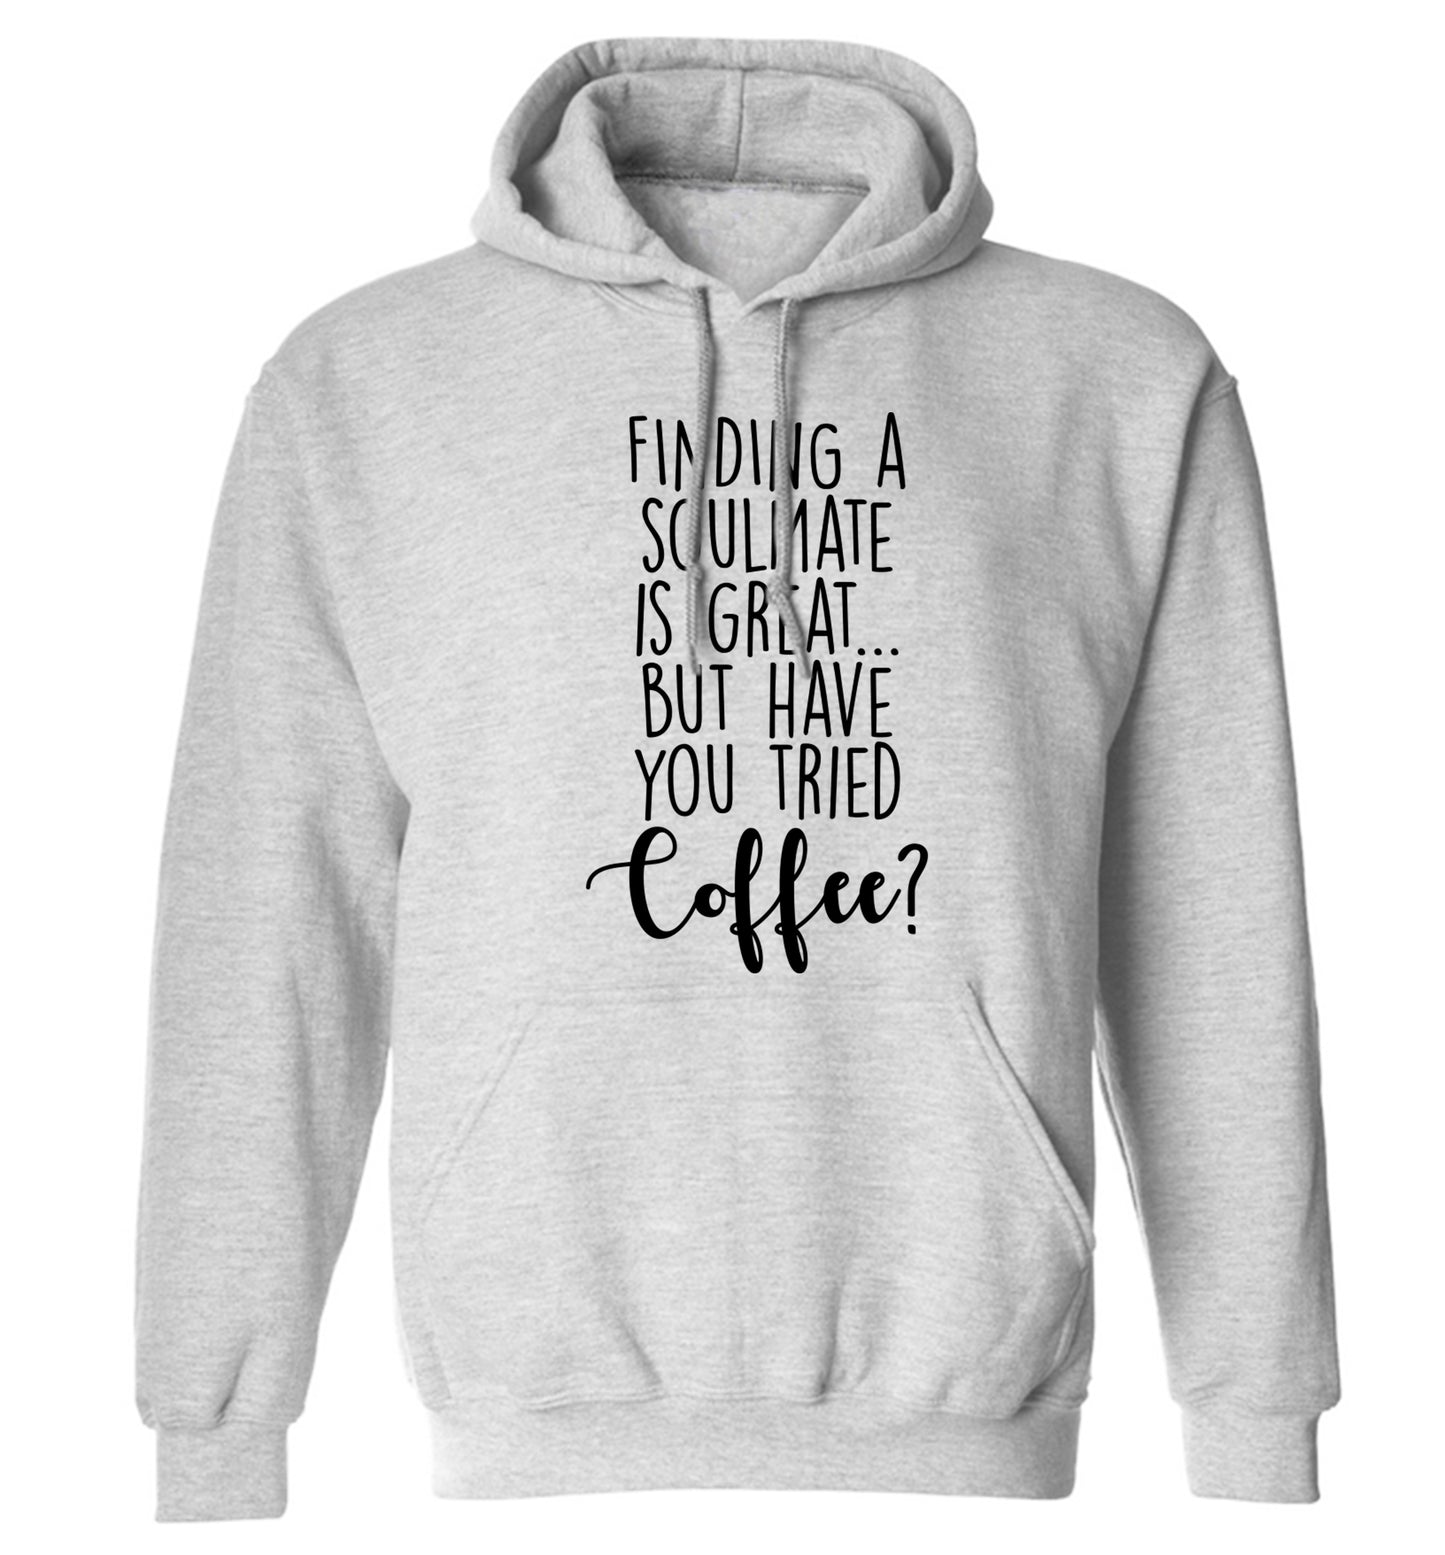 Finding a soulmate is great but have you tried coffee? adults unisex grey hoodie 2XL